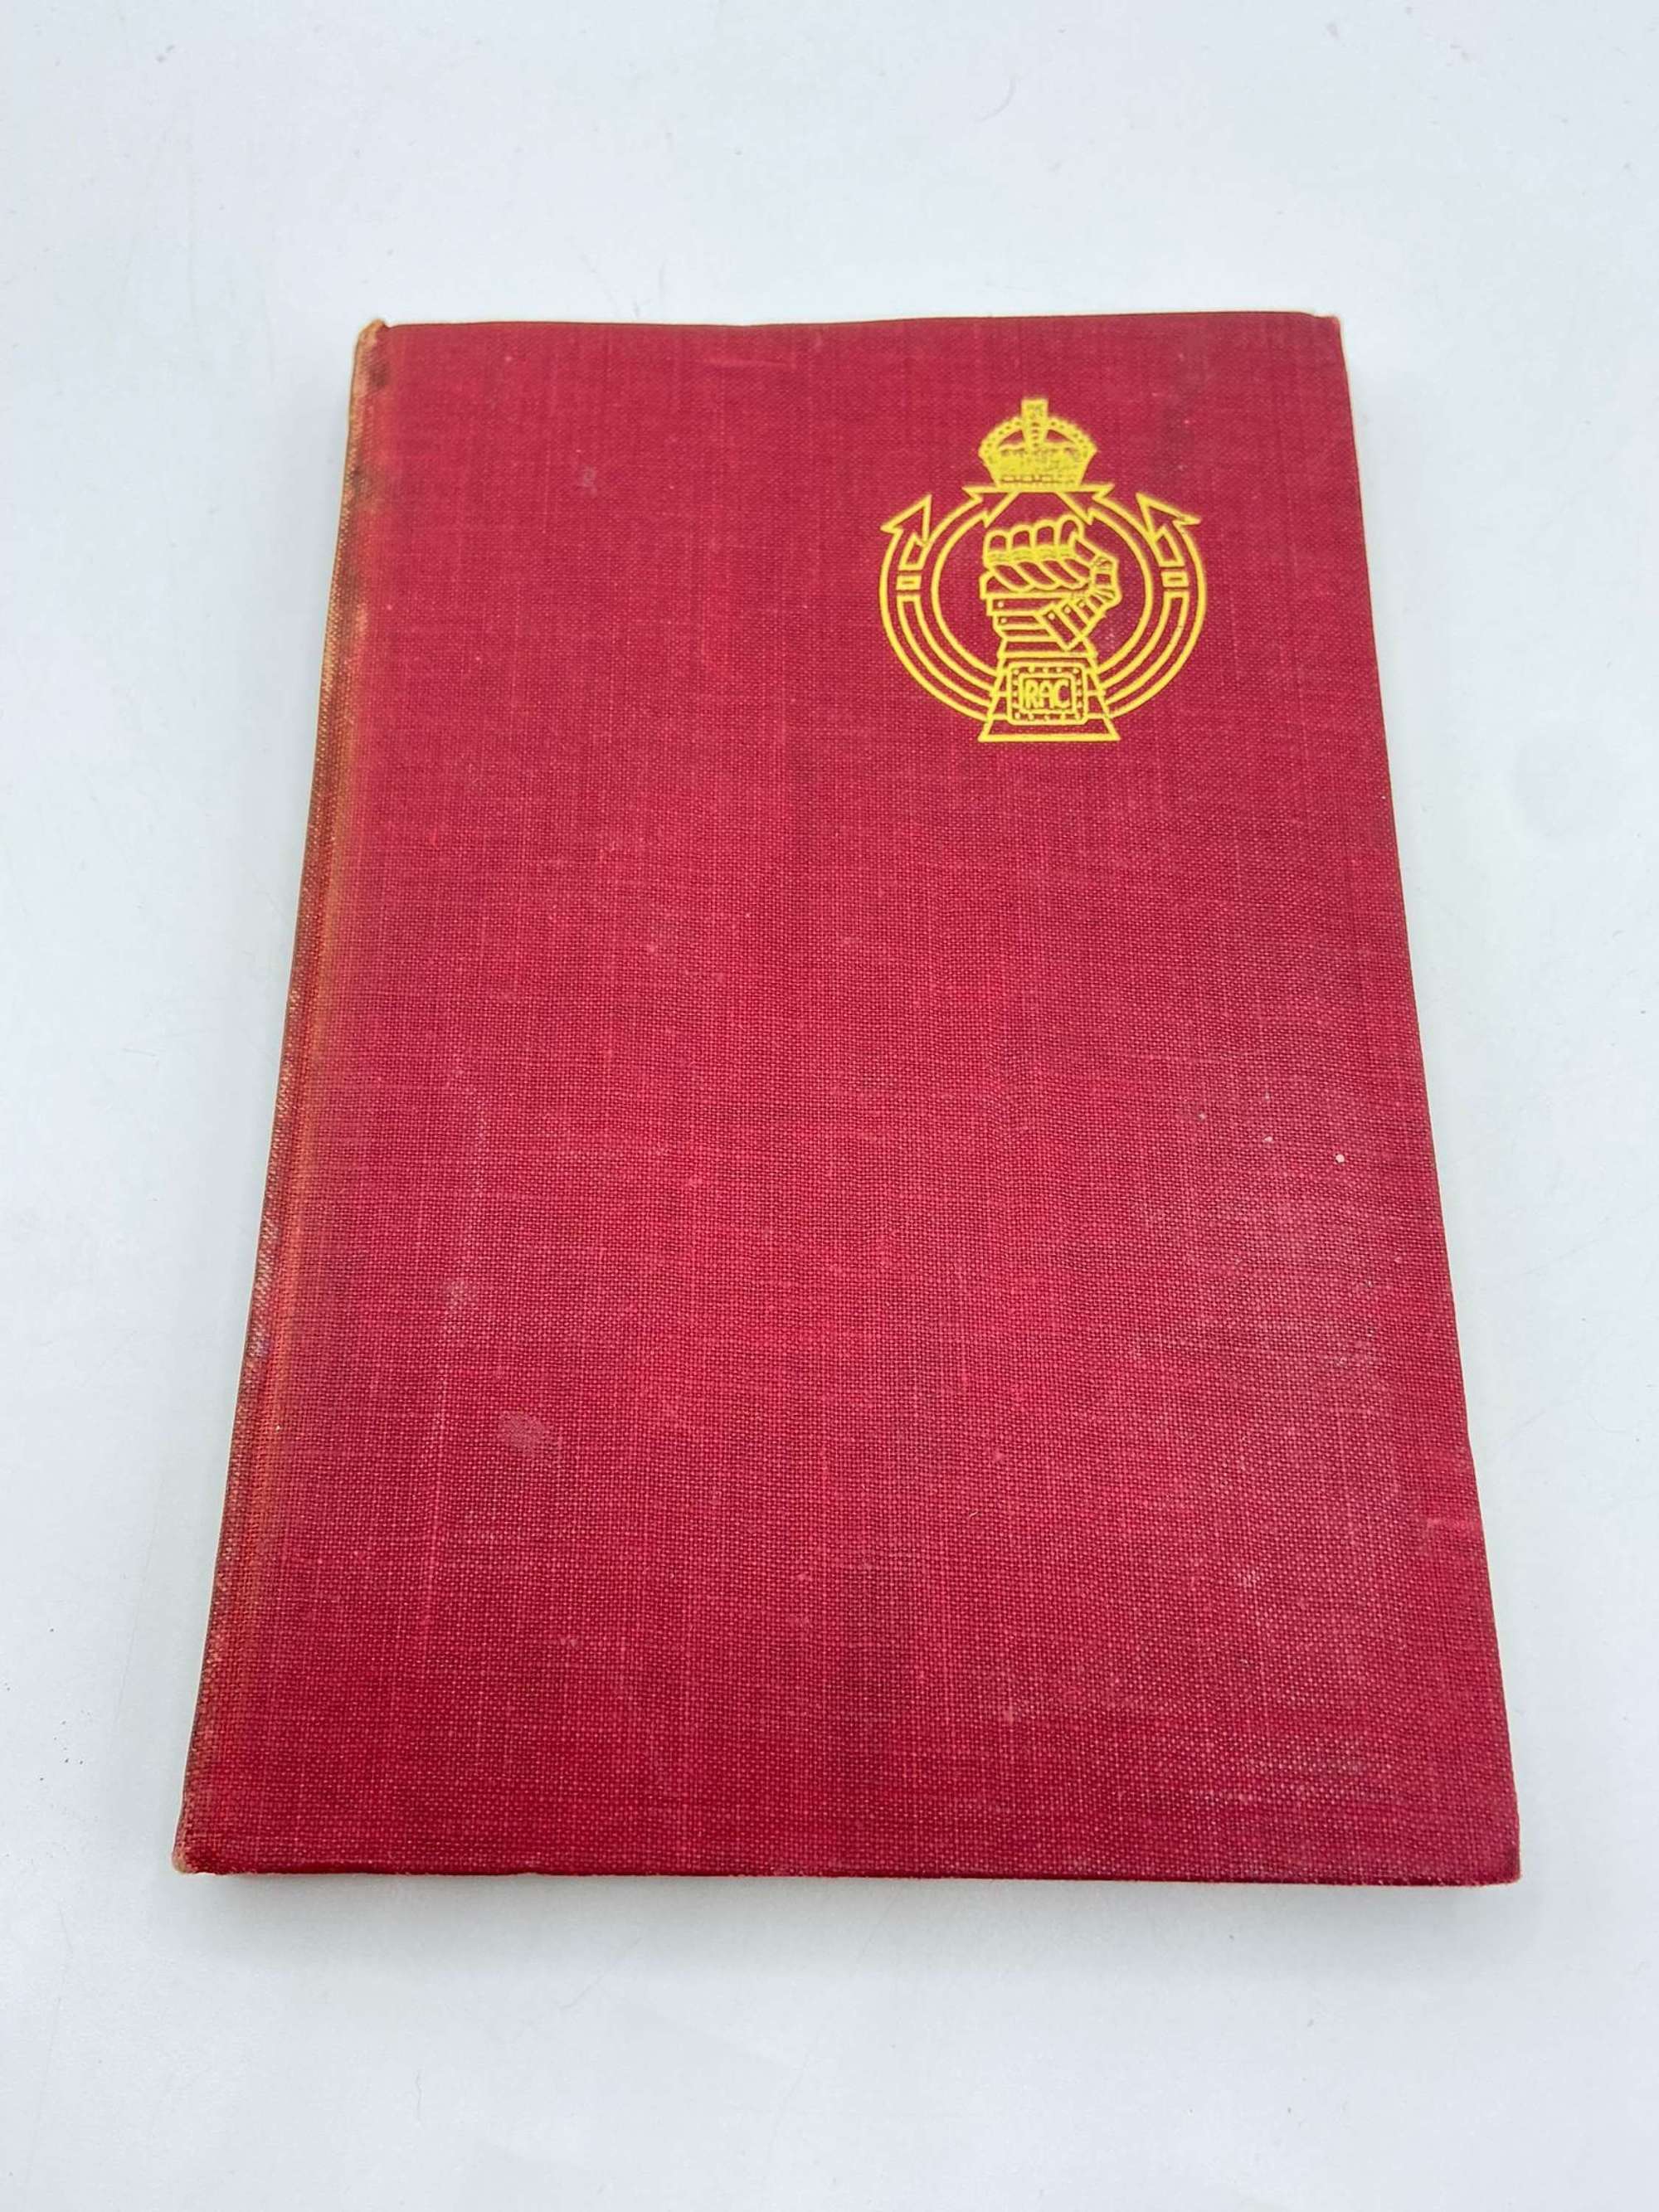 WW2 The Royal Armoured Corps By Captain J R W Murland 1943 Publication